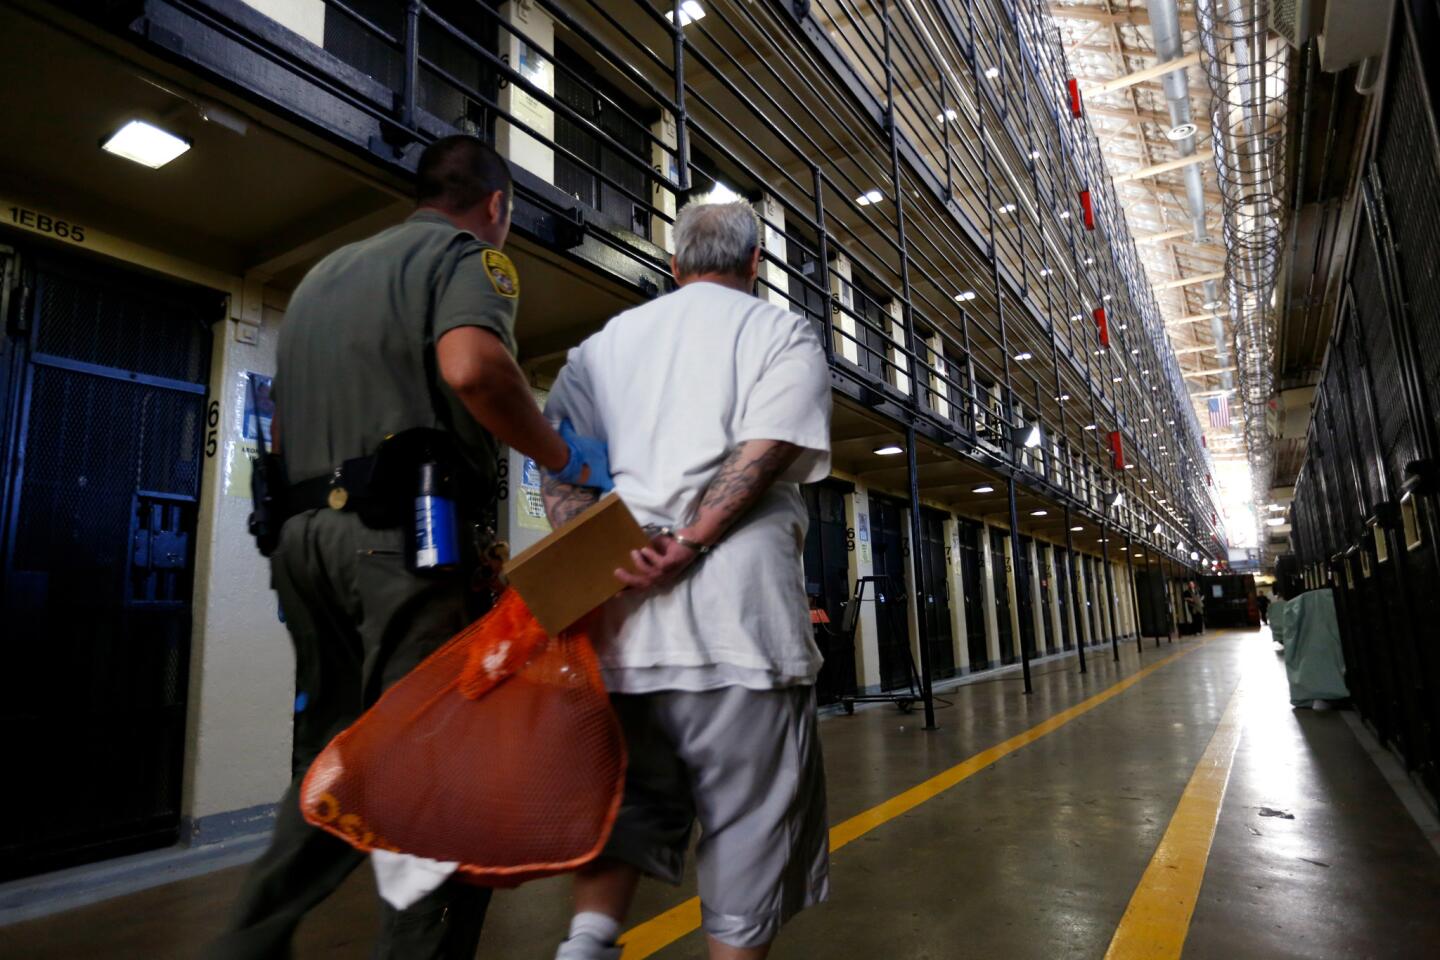 A death row inmate is escorted back to his East Block cell after spending time in the yard at San Quentin State Prison.